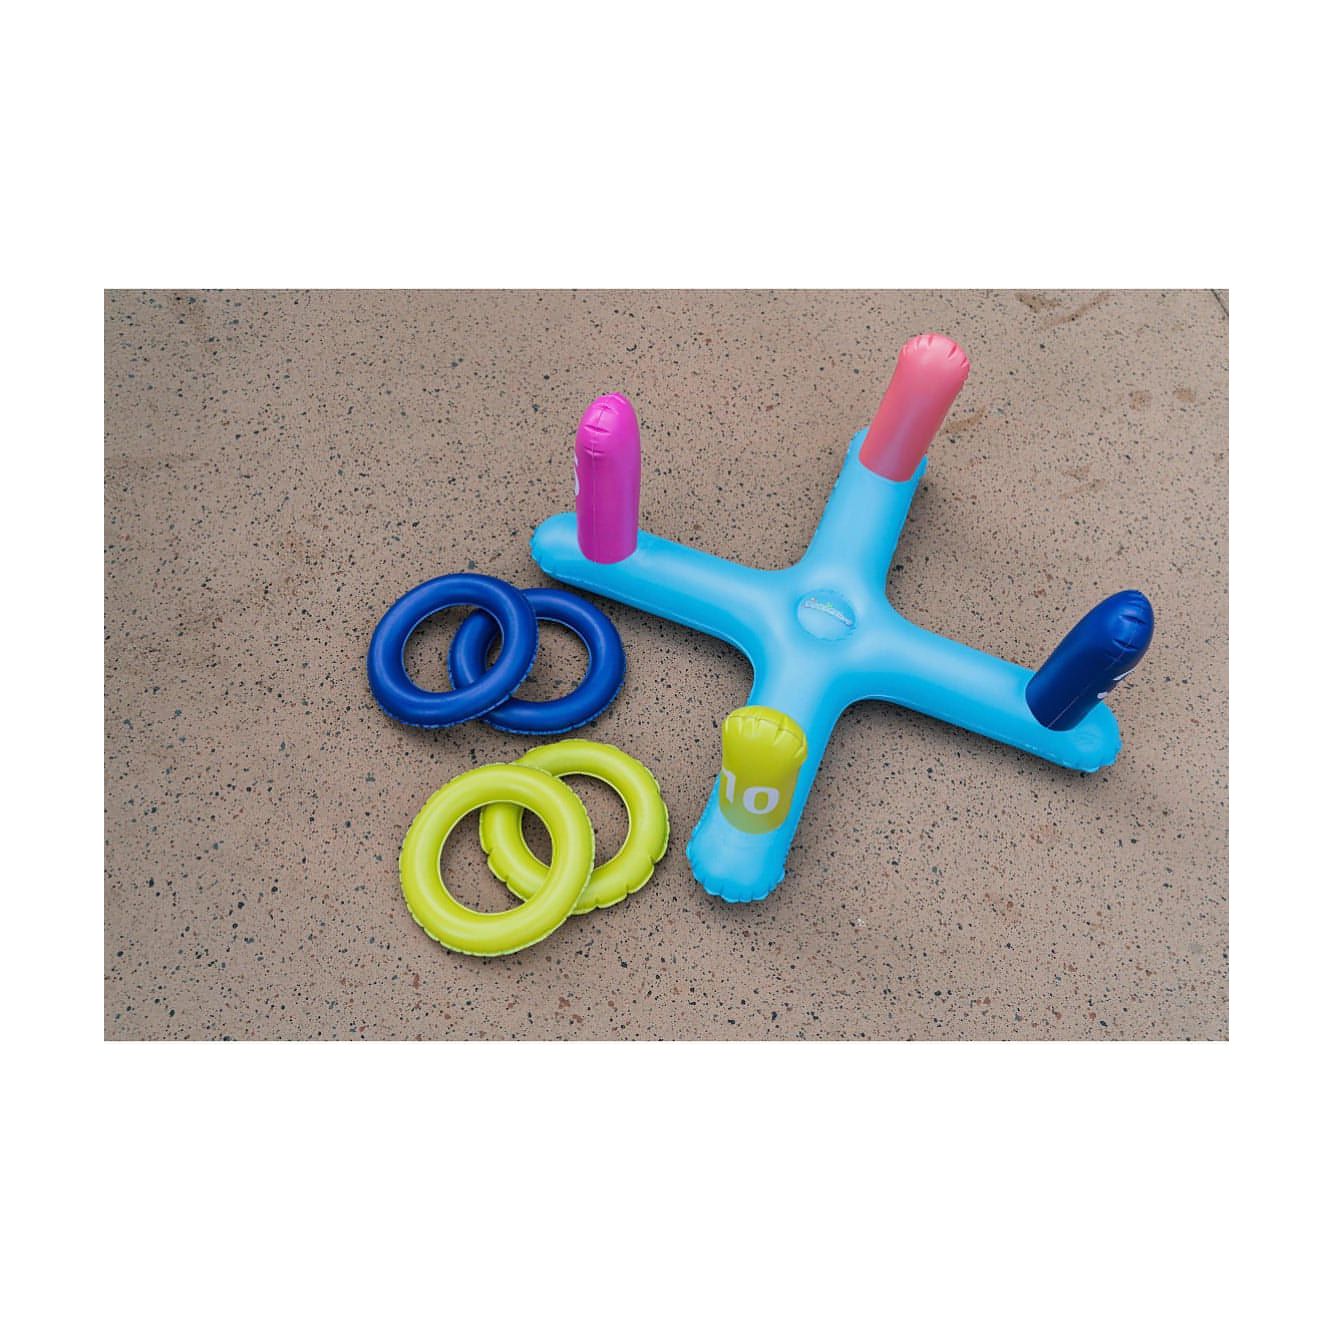 Buy PoolCandy Inflatable Ring Toss